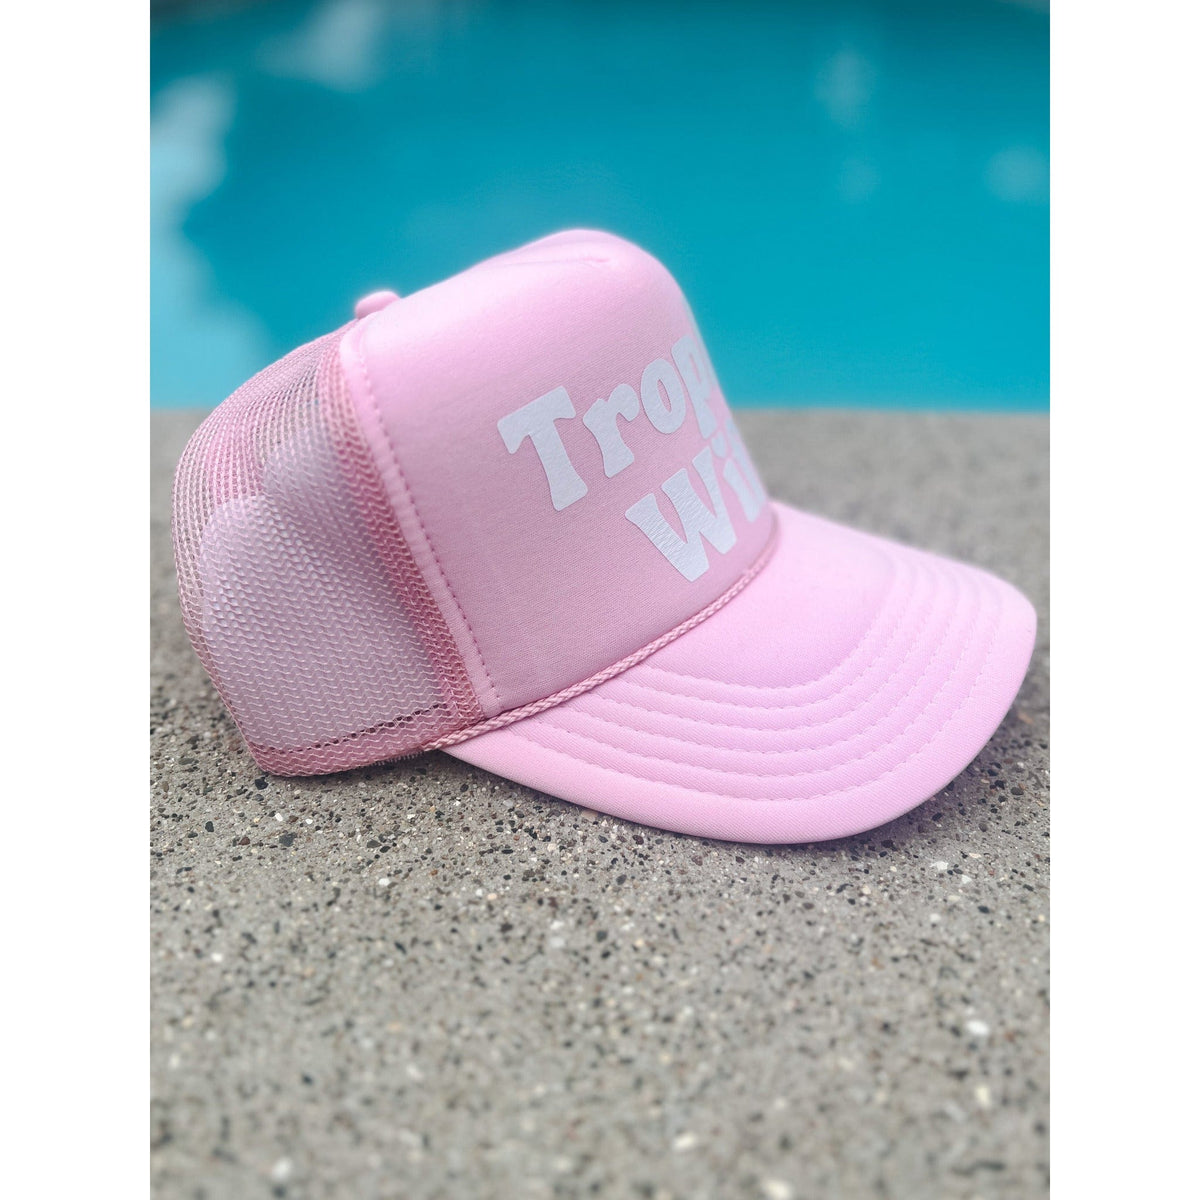 Trophy Wife White and Pink Trucker Hat Hats TheFringeCultureCollective